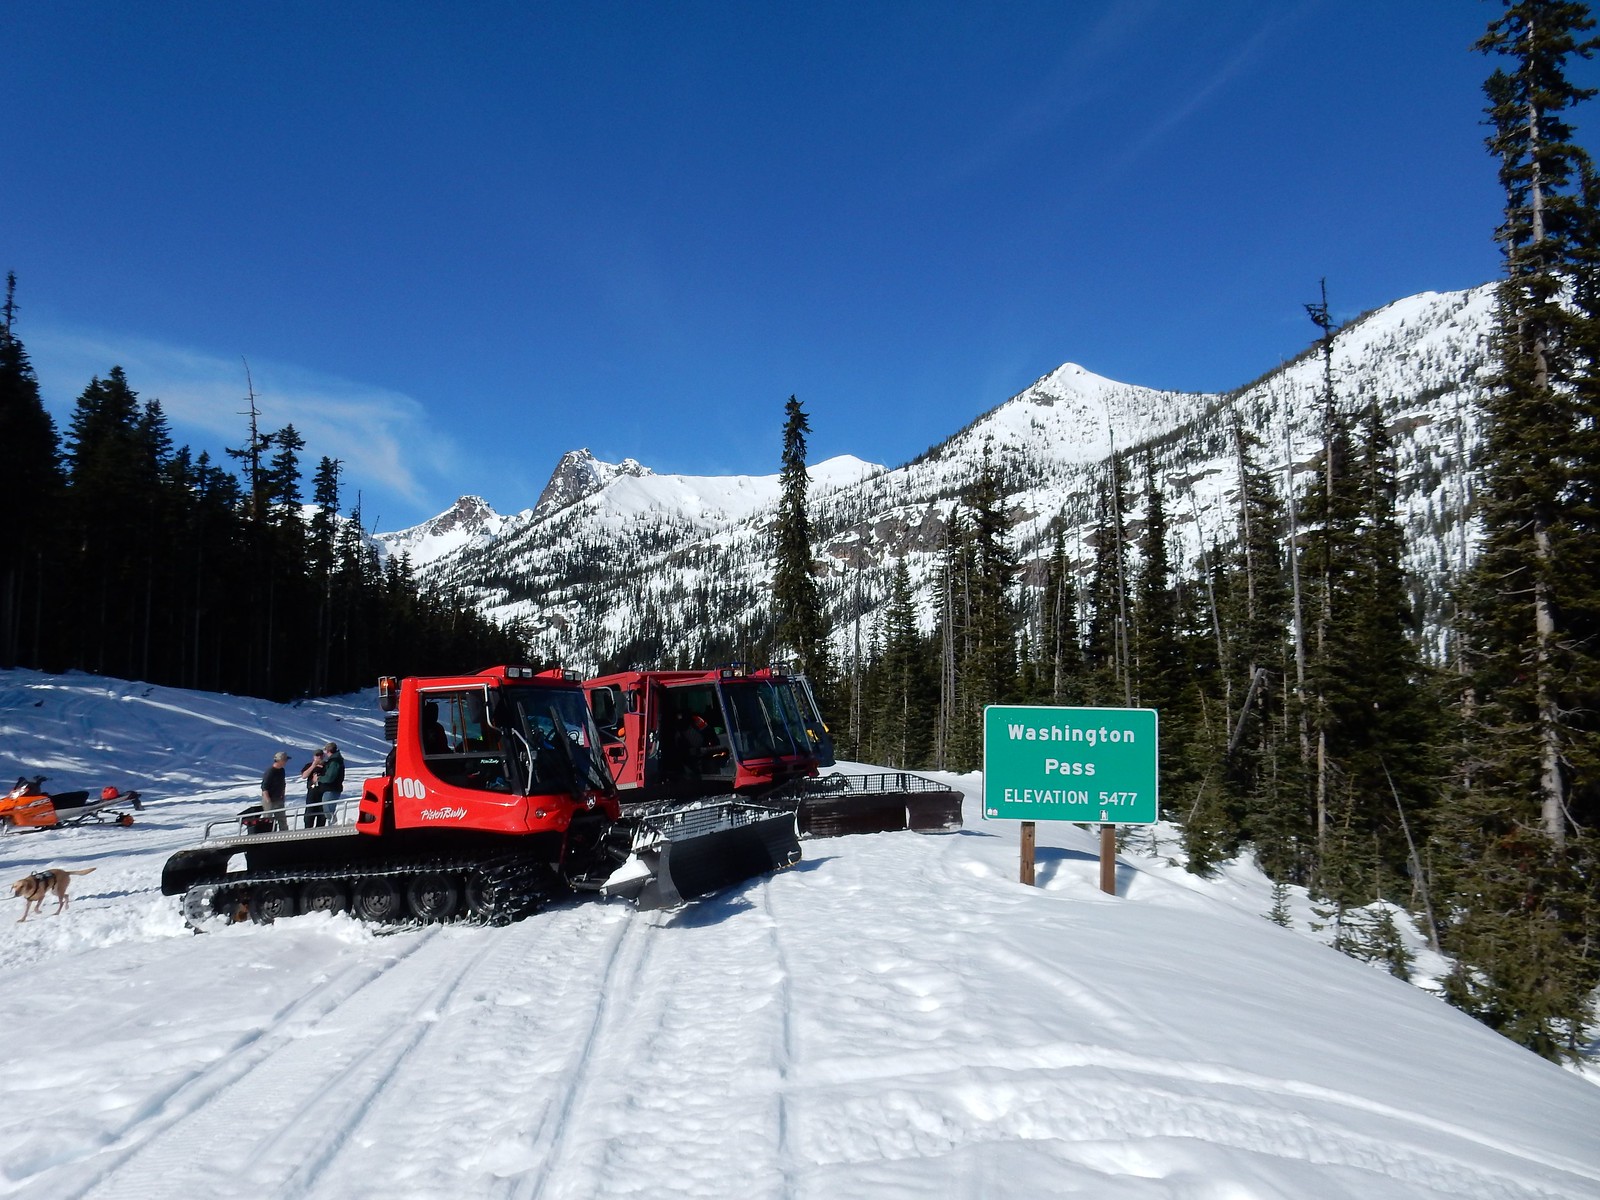 Photograph of snow on top of Washington Summit in the Cascades of Washington State, March 2015. The image shows multiple snow machines with small plows on the fronts. Some people, a dog, and a smaller snow mobile are near the larger machines. Snowy mountain peaks rise in the background, and conifers occur on the mountain slopes.